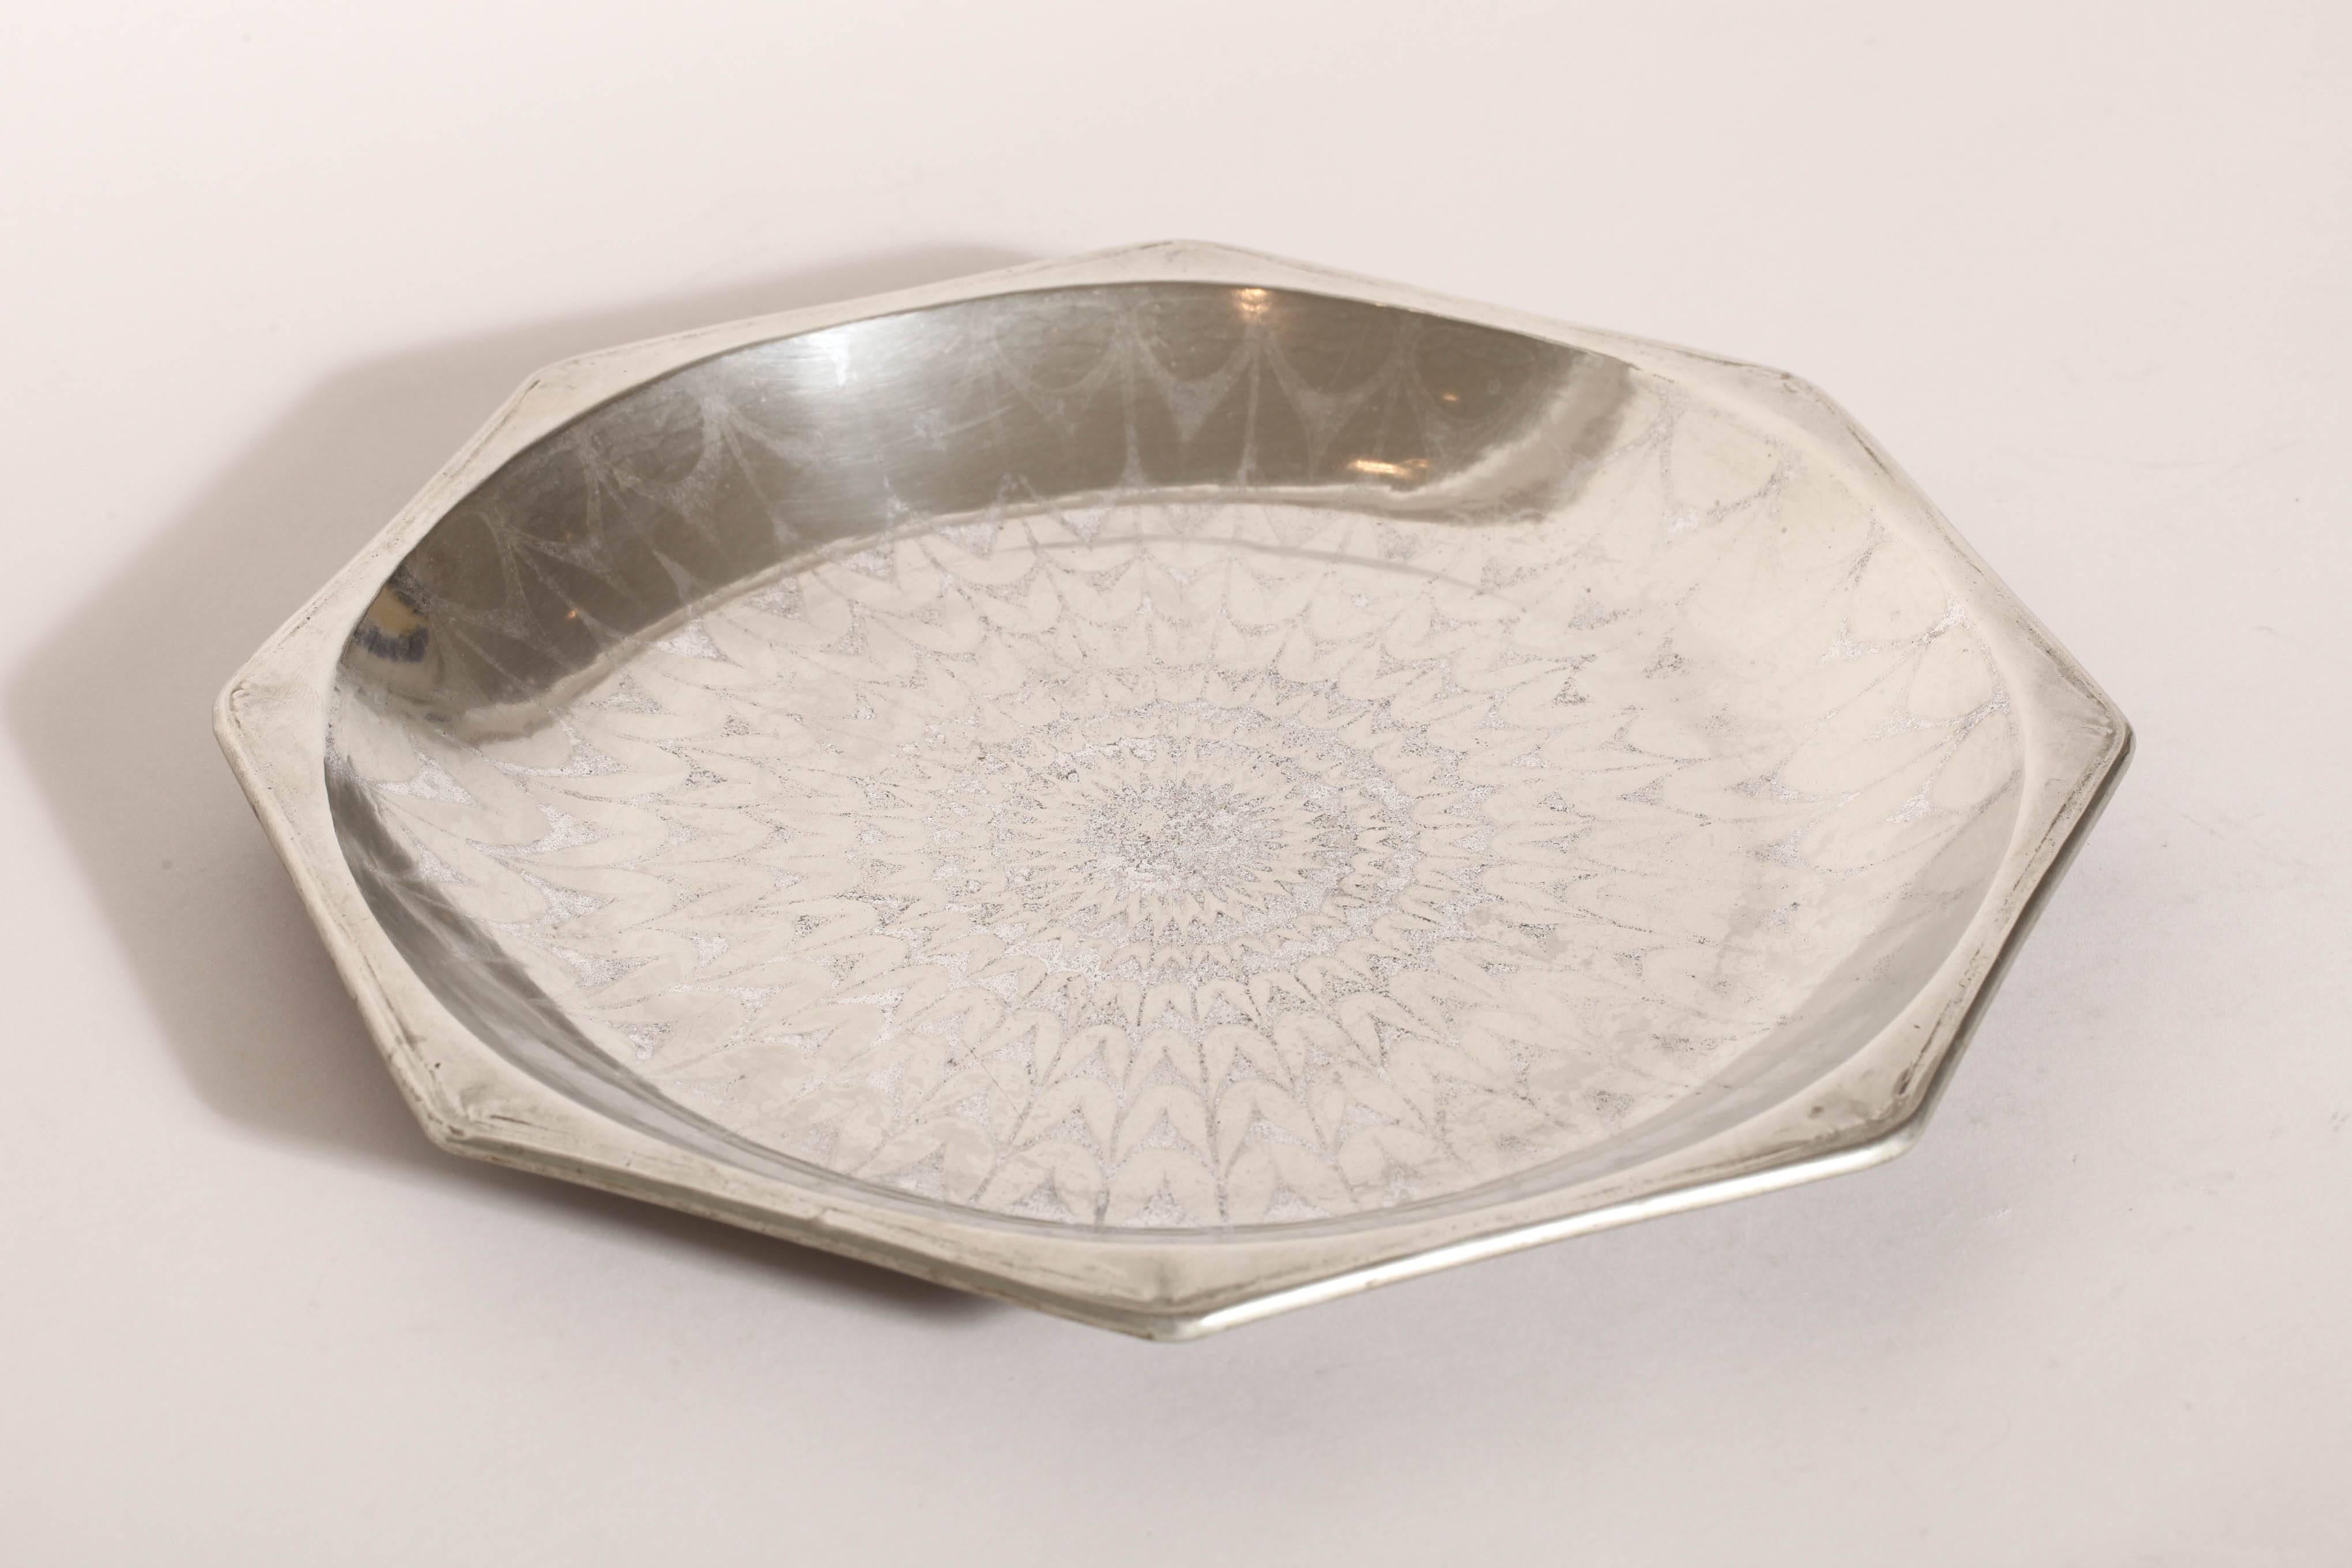 Octagonal maillechort tray with intricate silver design and with rolled rim.
Inscribed 